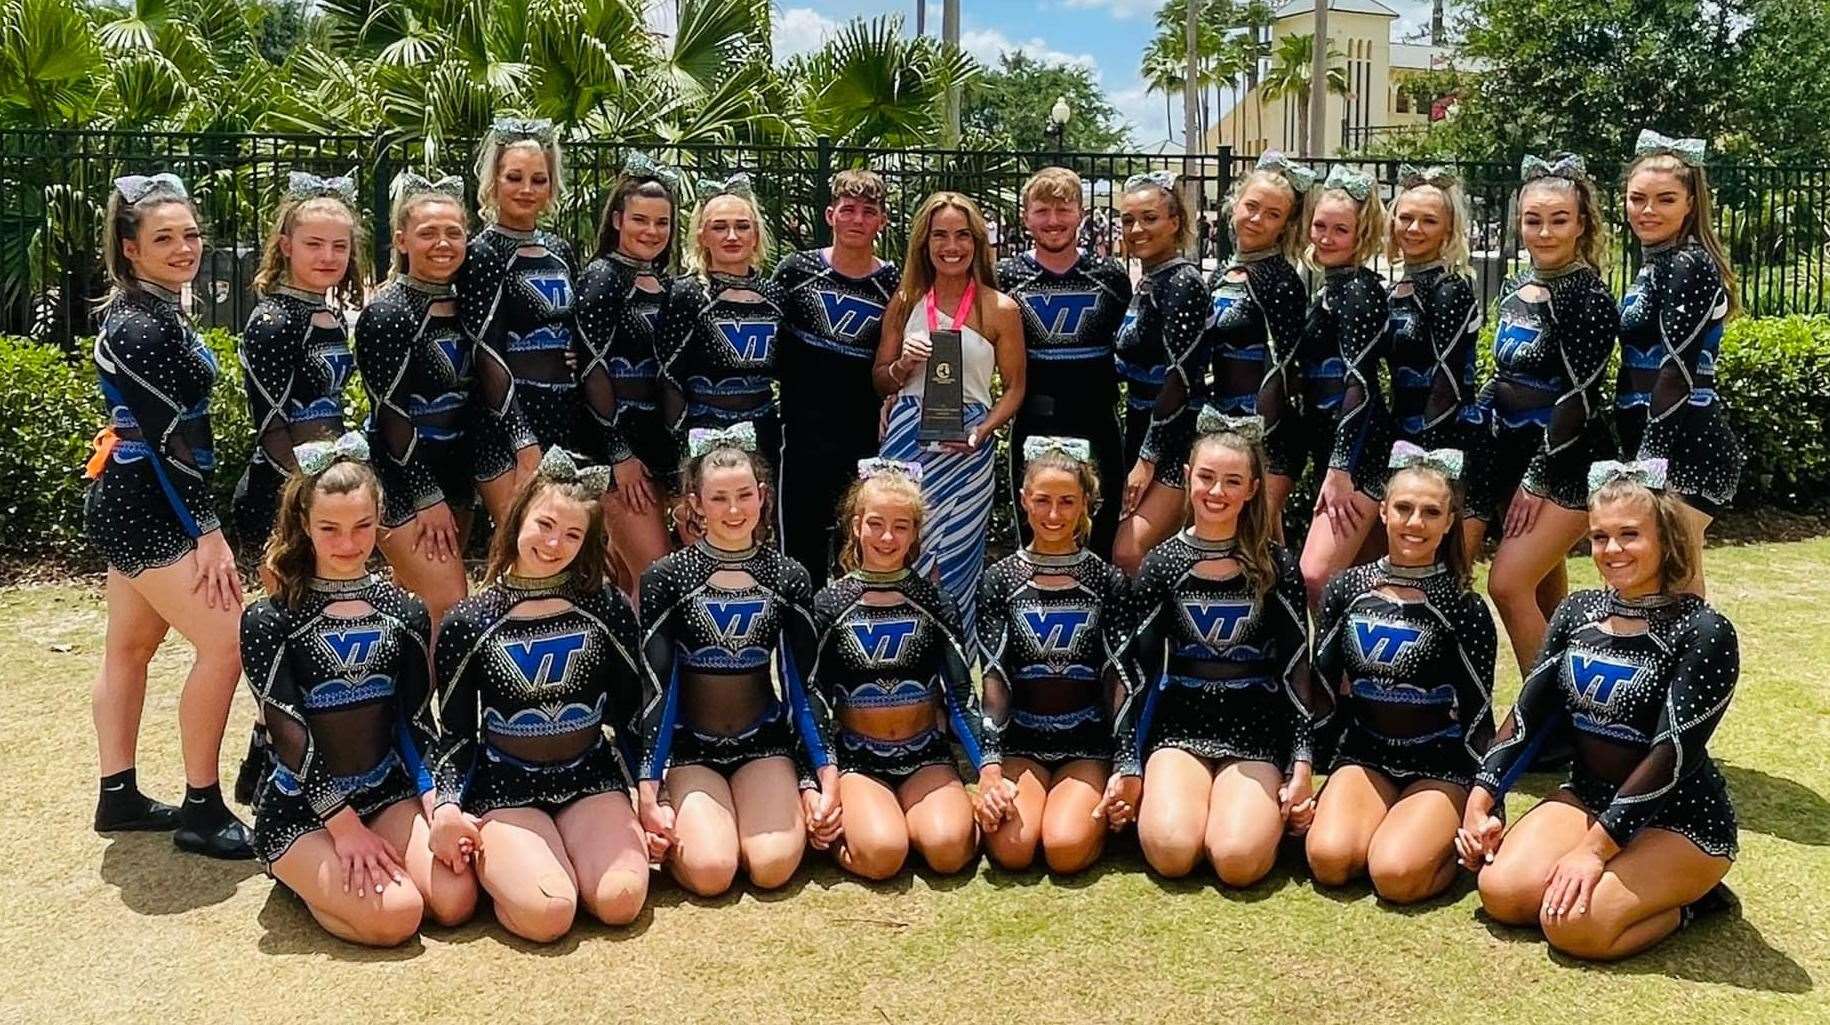 The Vista Twisters T5 squad finished seventh at the ESPN Wide World of Sports Complex